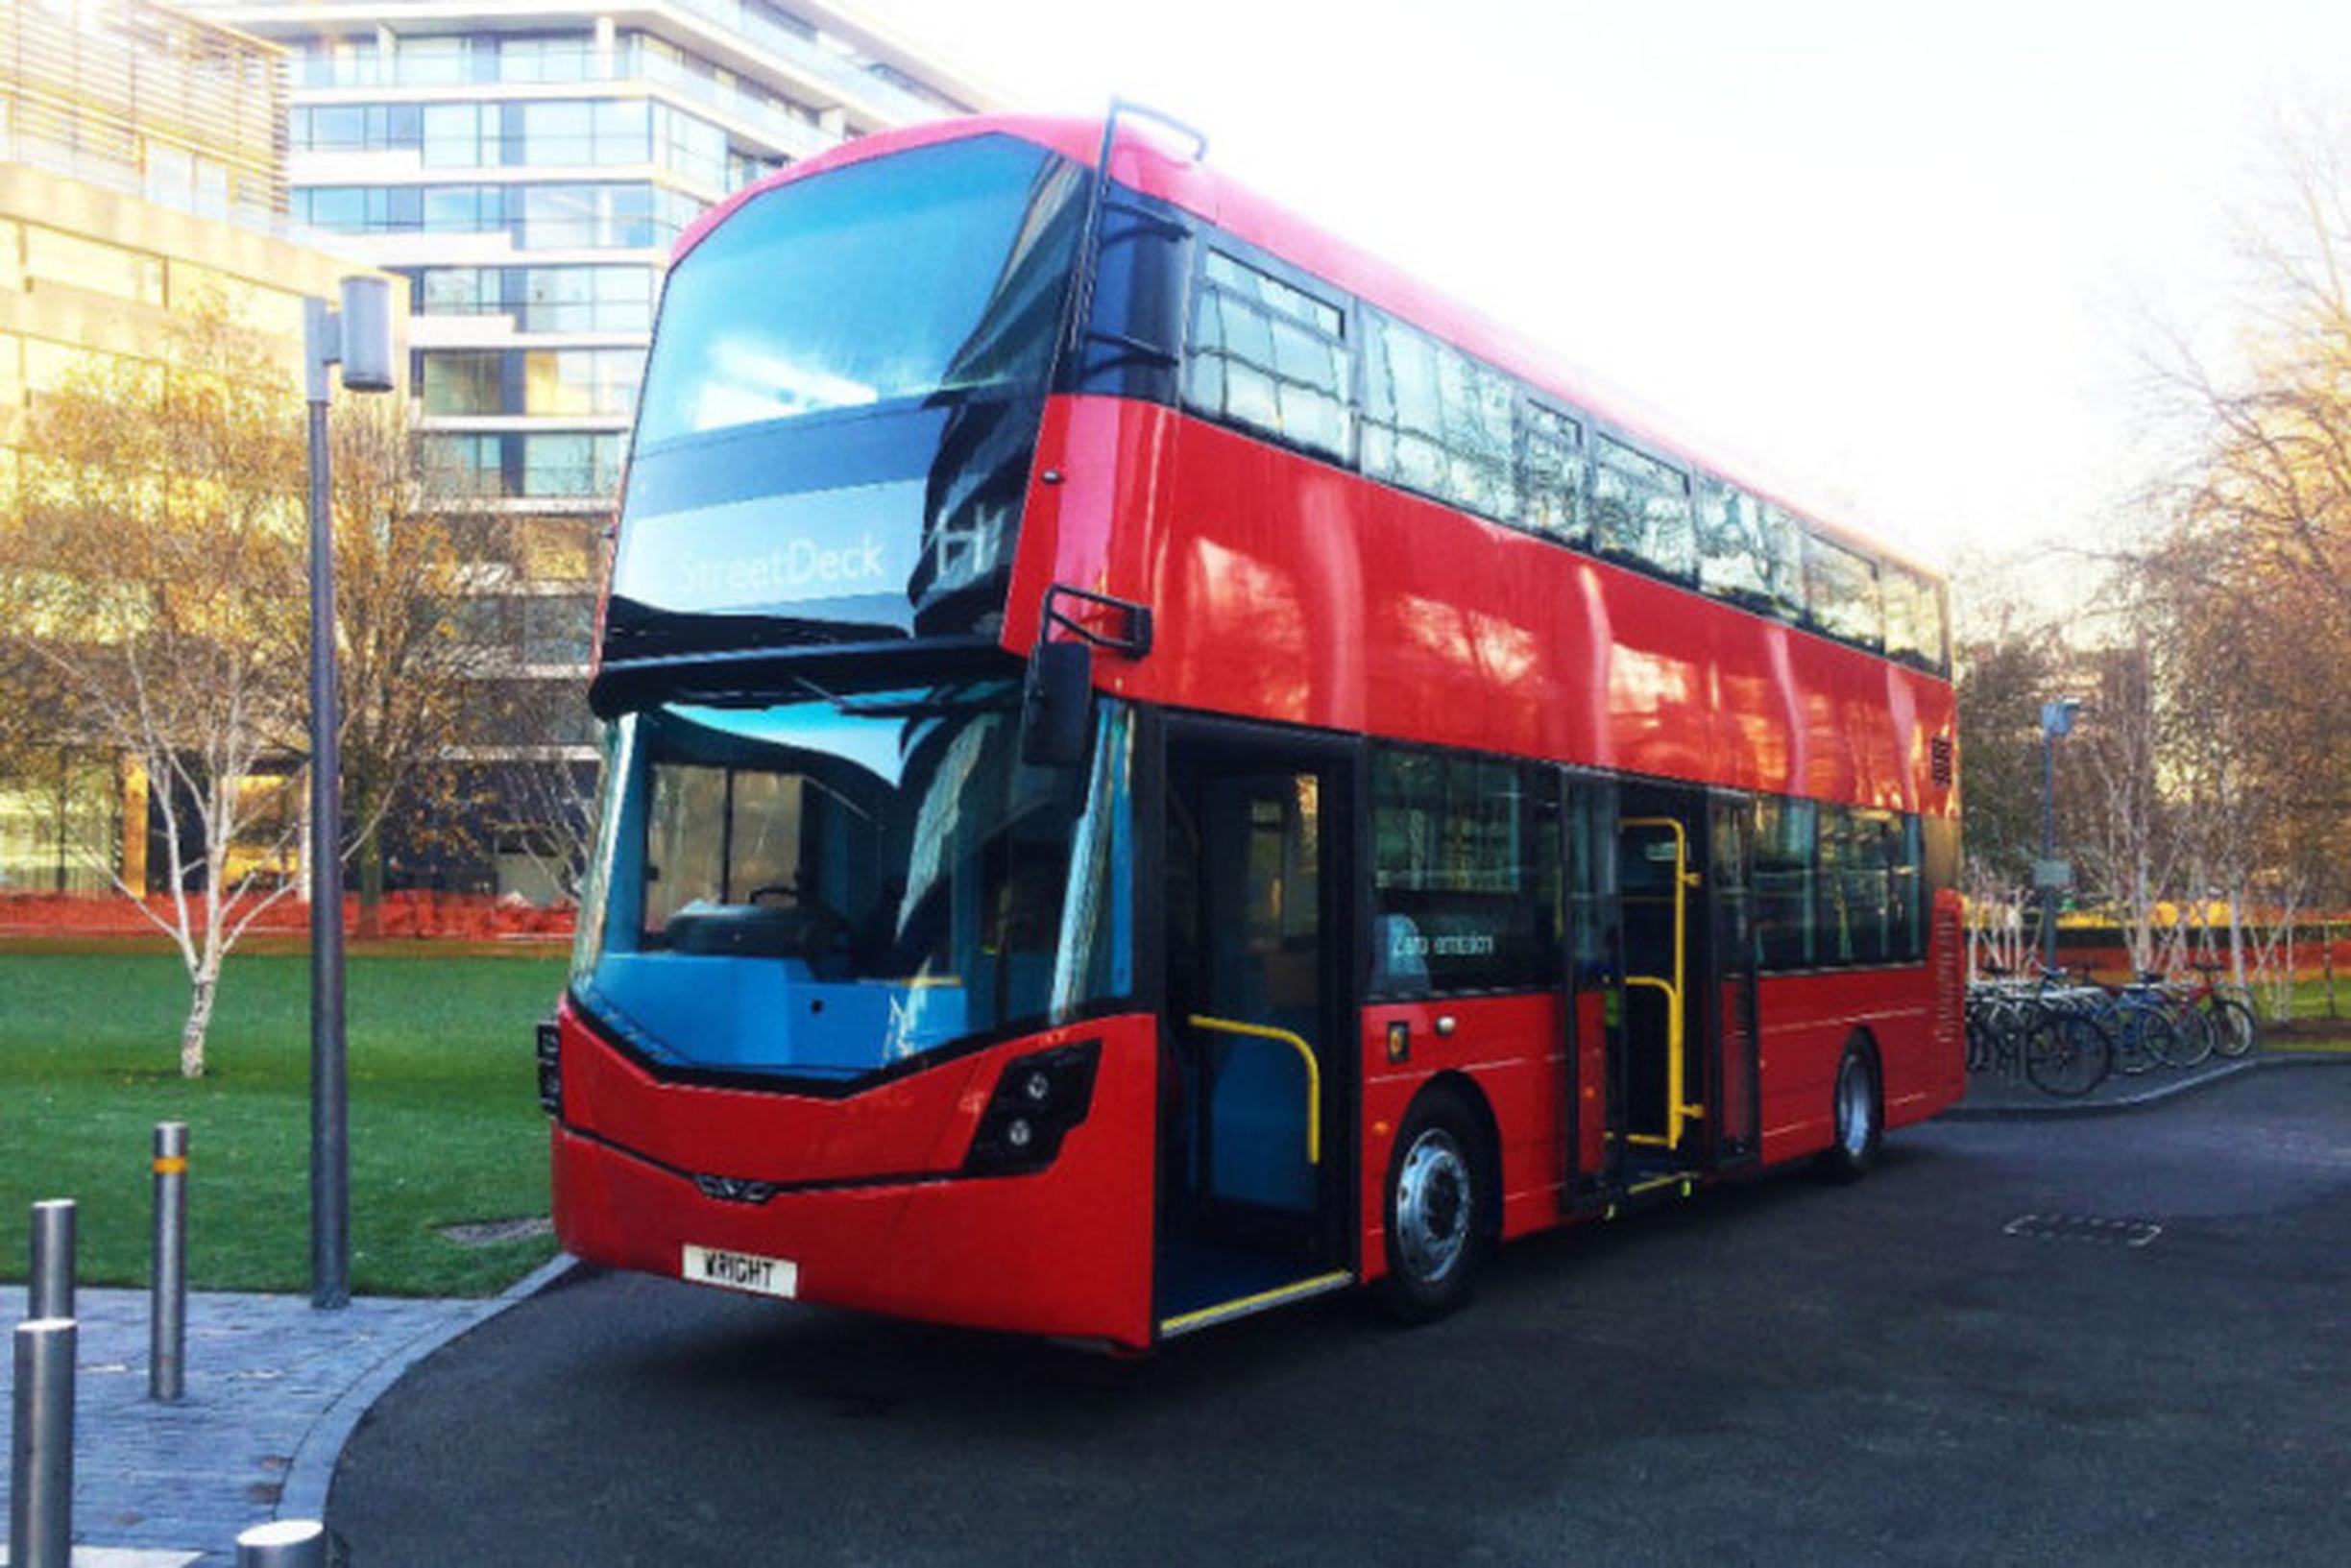 The new Wrightbus hydrogen-powered double-decker